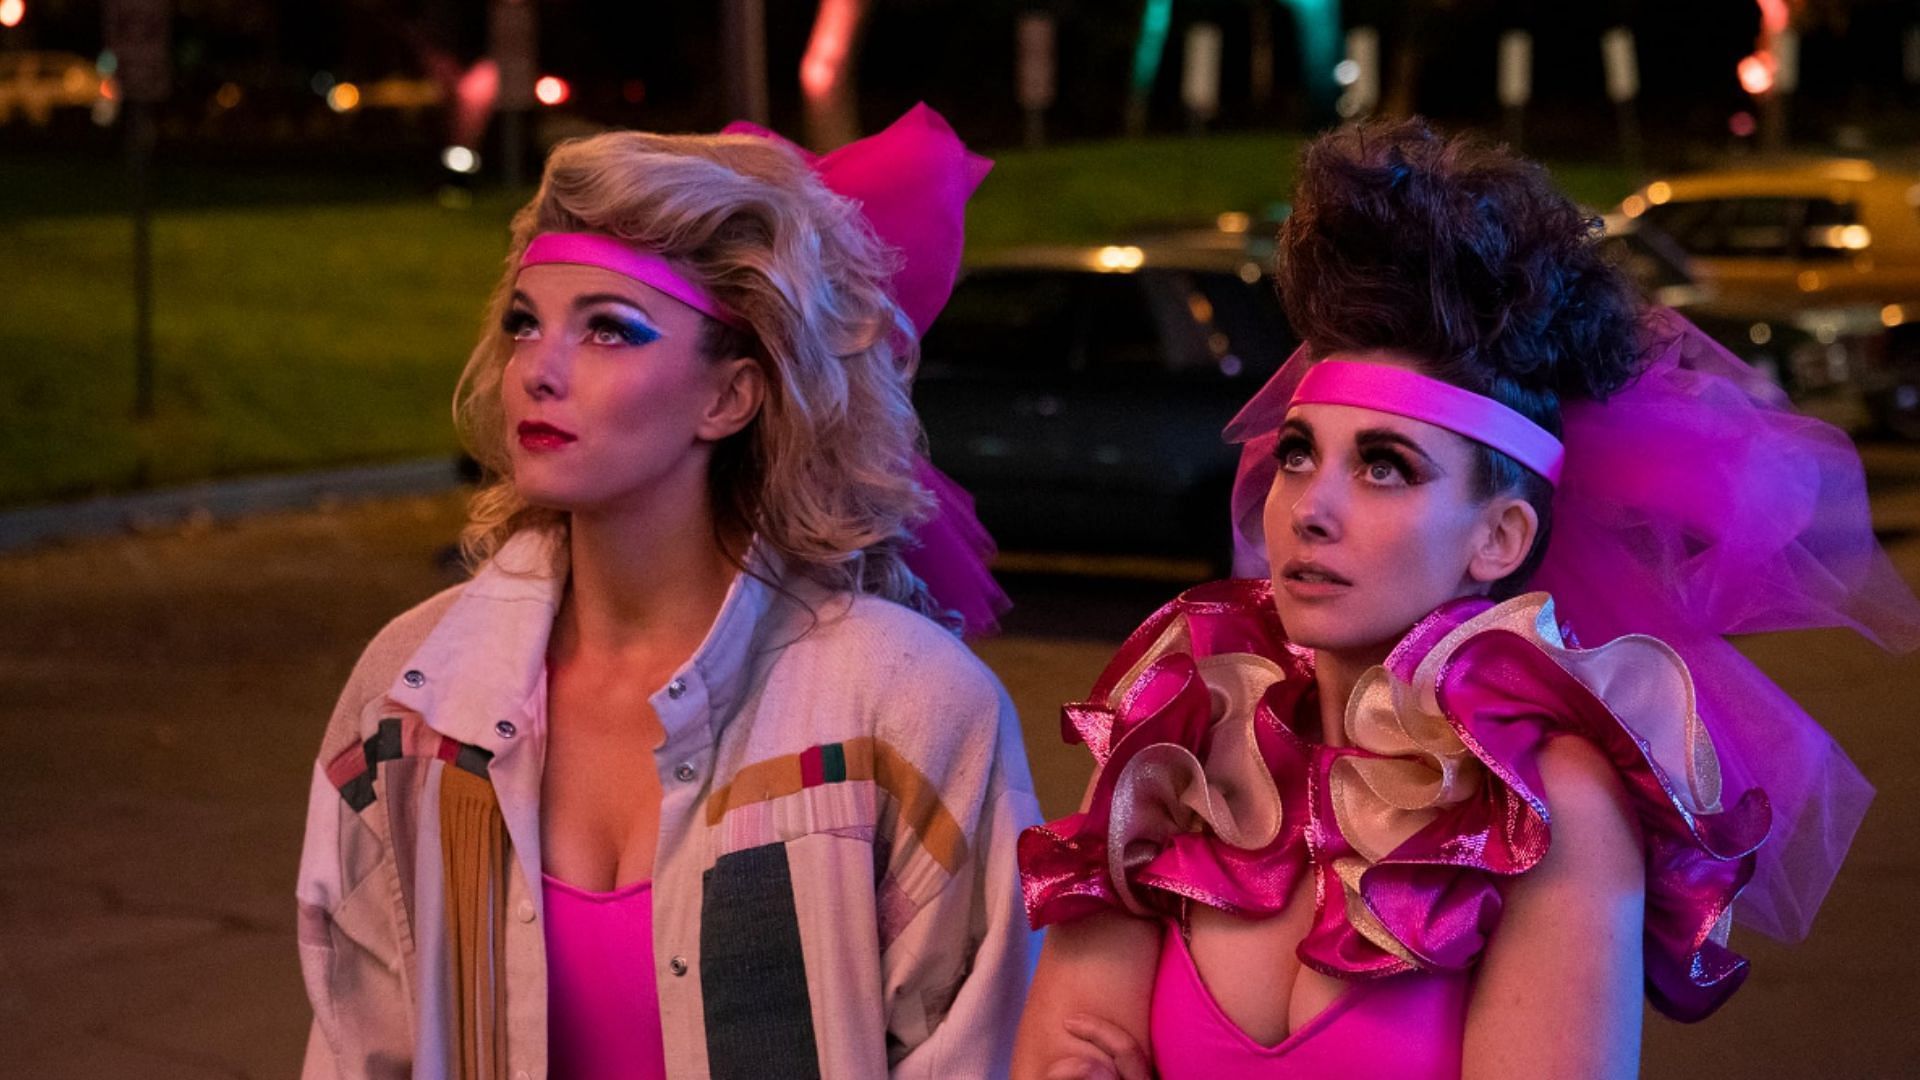 Ruth and Debbie played Alison Brie and Betty Gilpin have a complex relationship in this sports drama show (Image via Netflix)